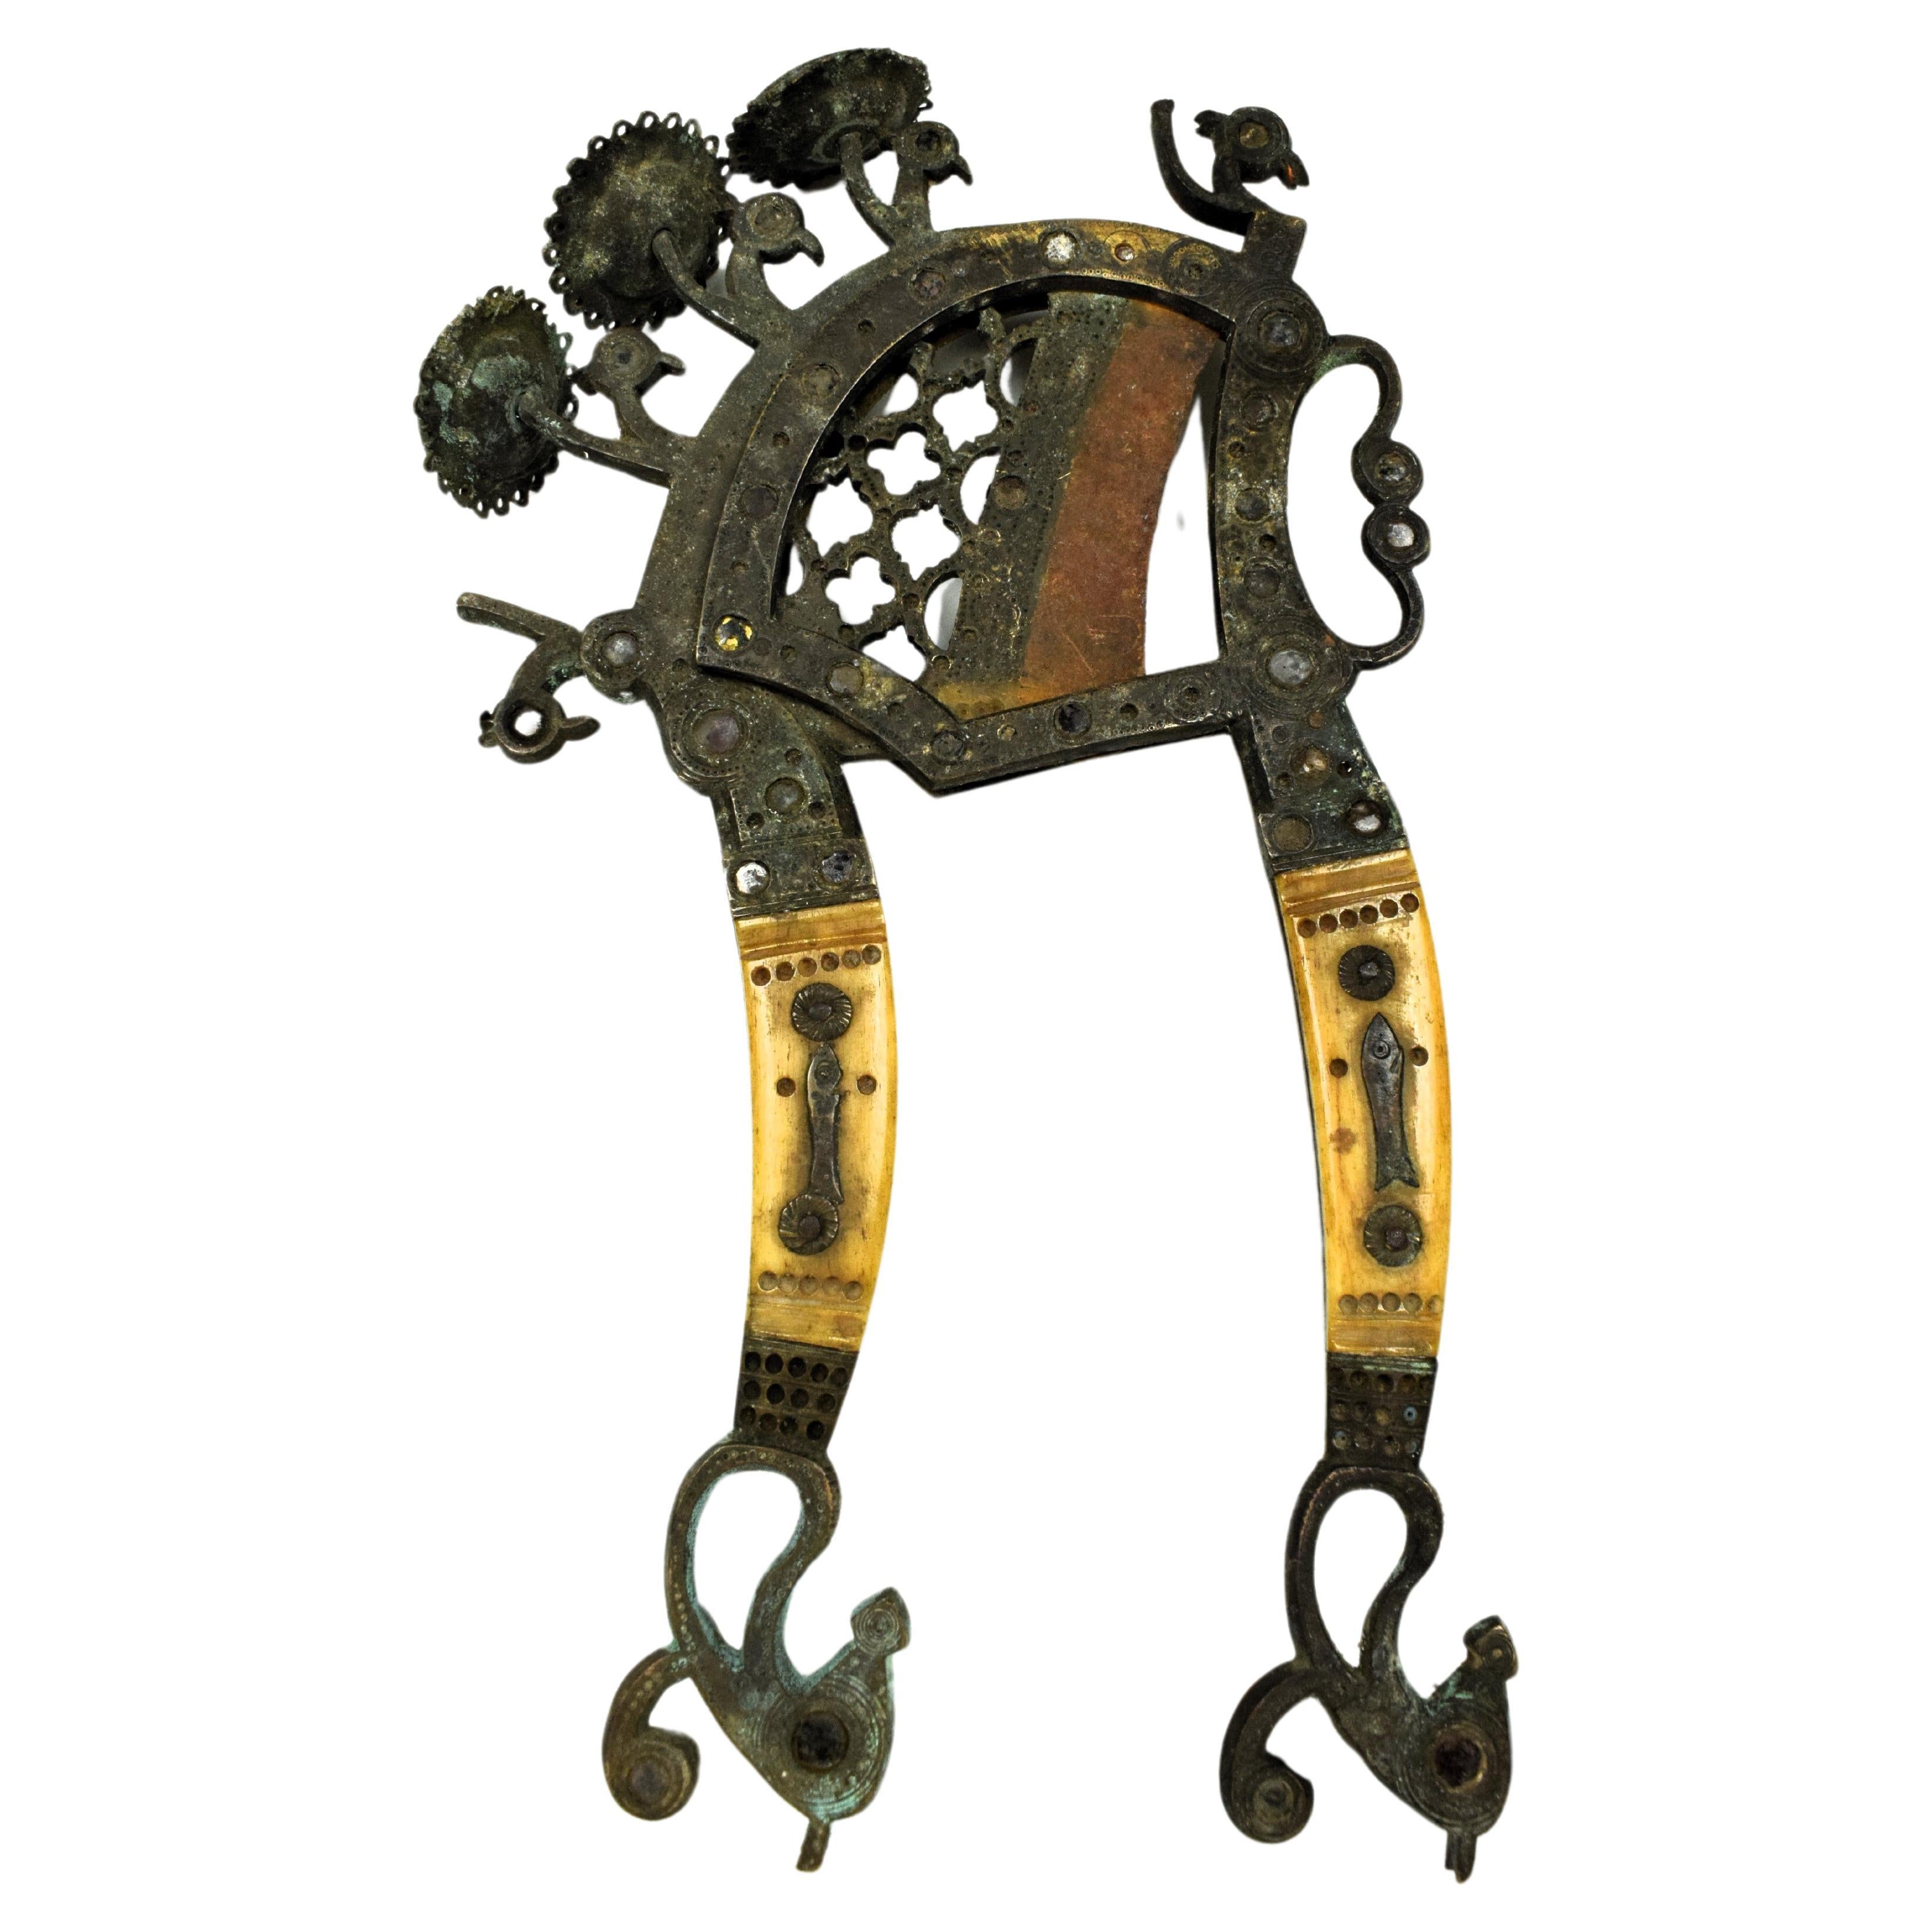 Mughal Indian Betel Nut Cutter, Mid 19th Century